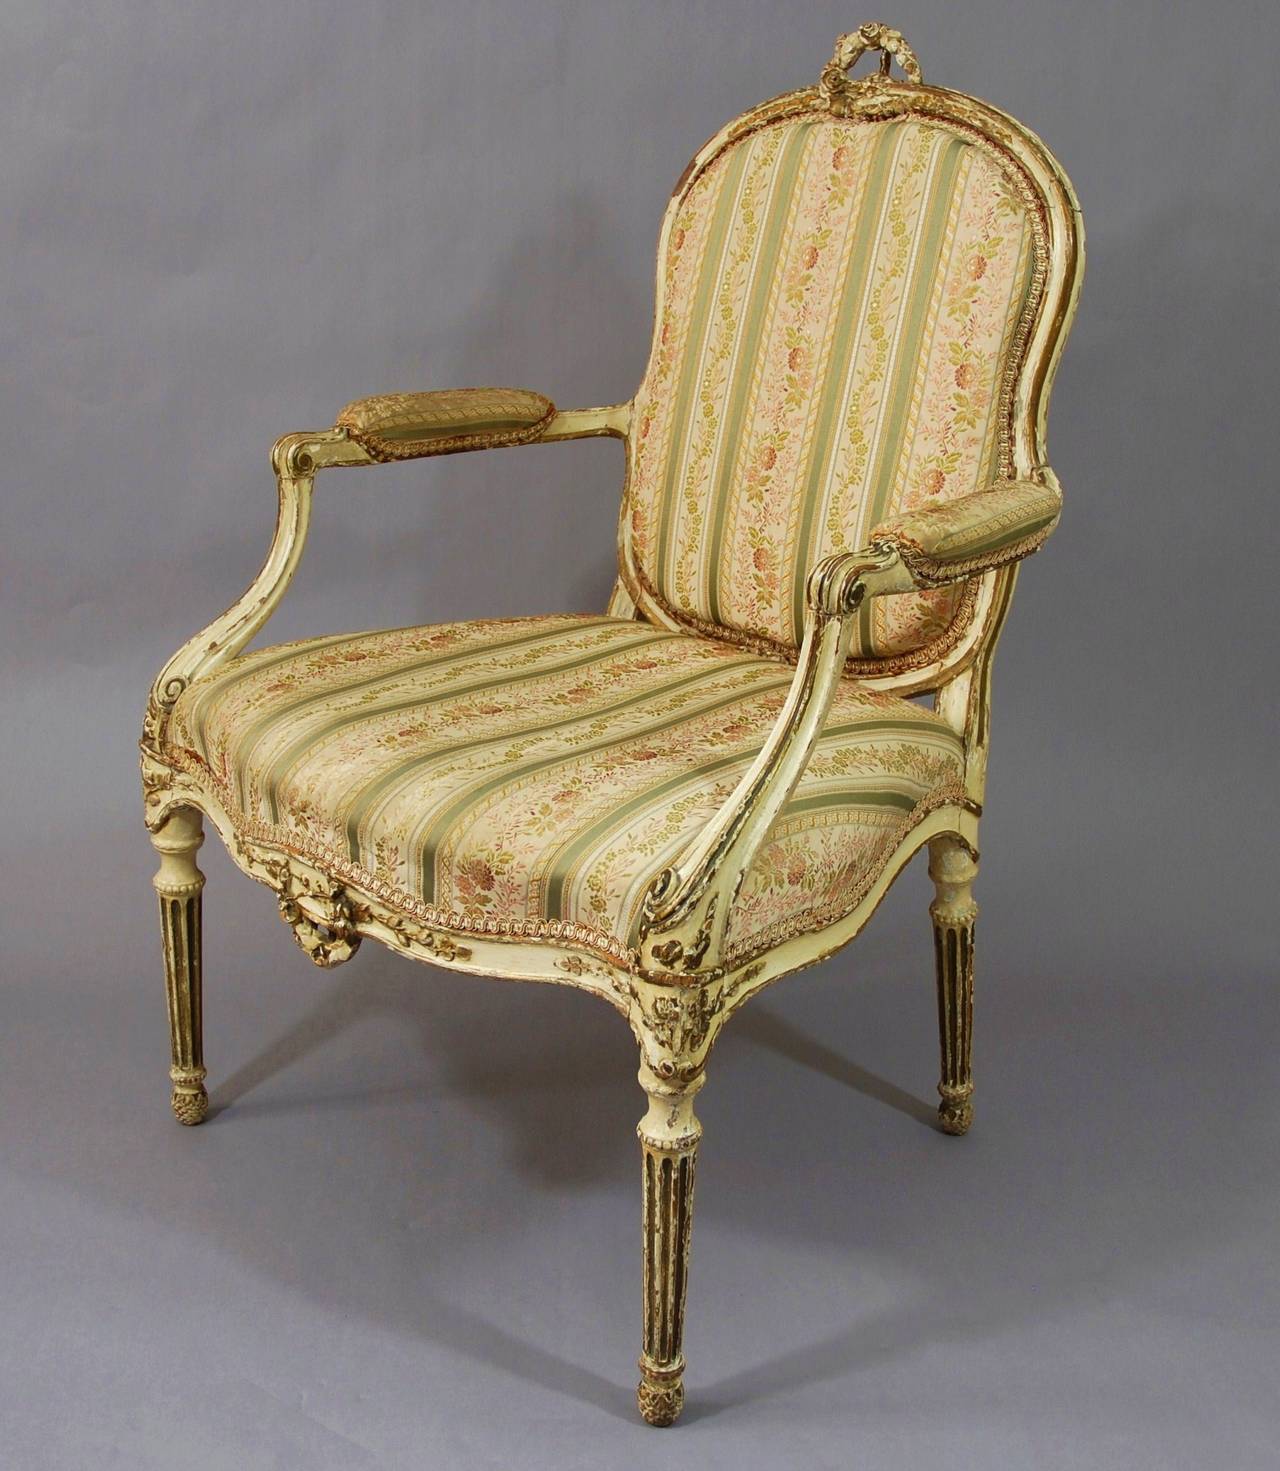 A very decorative 18th century, French painted open armchair.
 
The legs are turned & fluted & terminate with a pineapple foot. 

The serpentine front rail and the top rail are decorated with a foliage wreath.

The chair was from a private